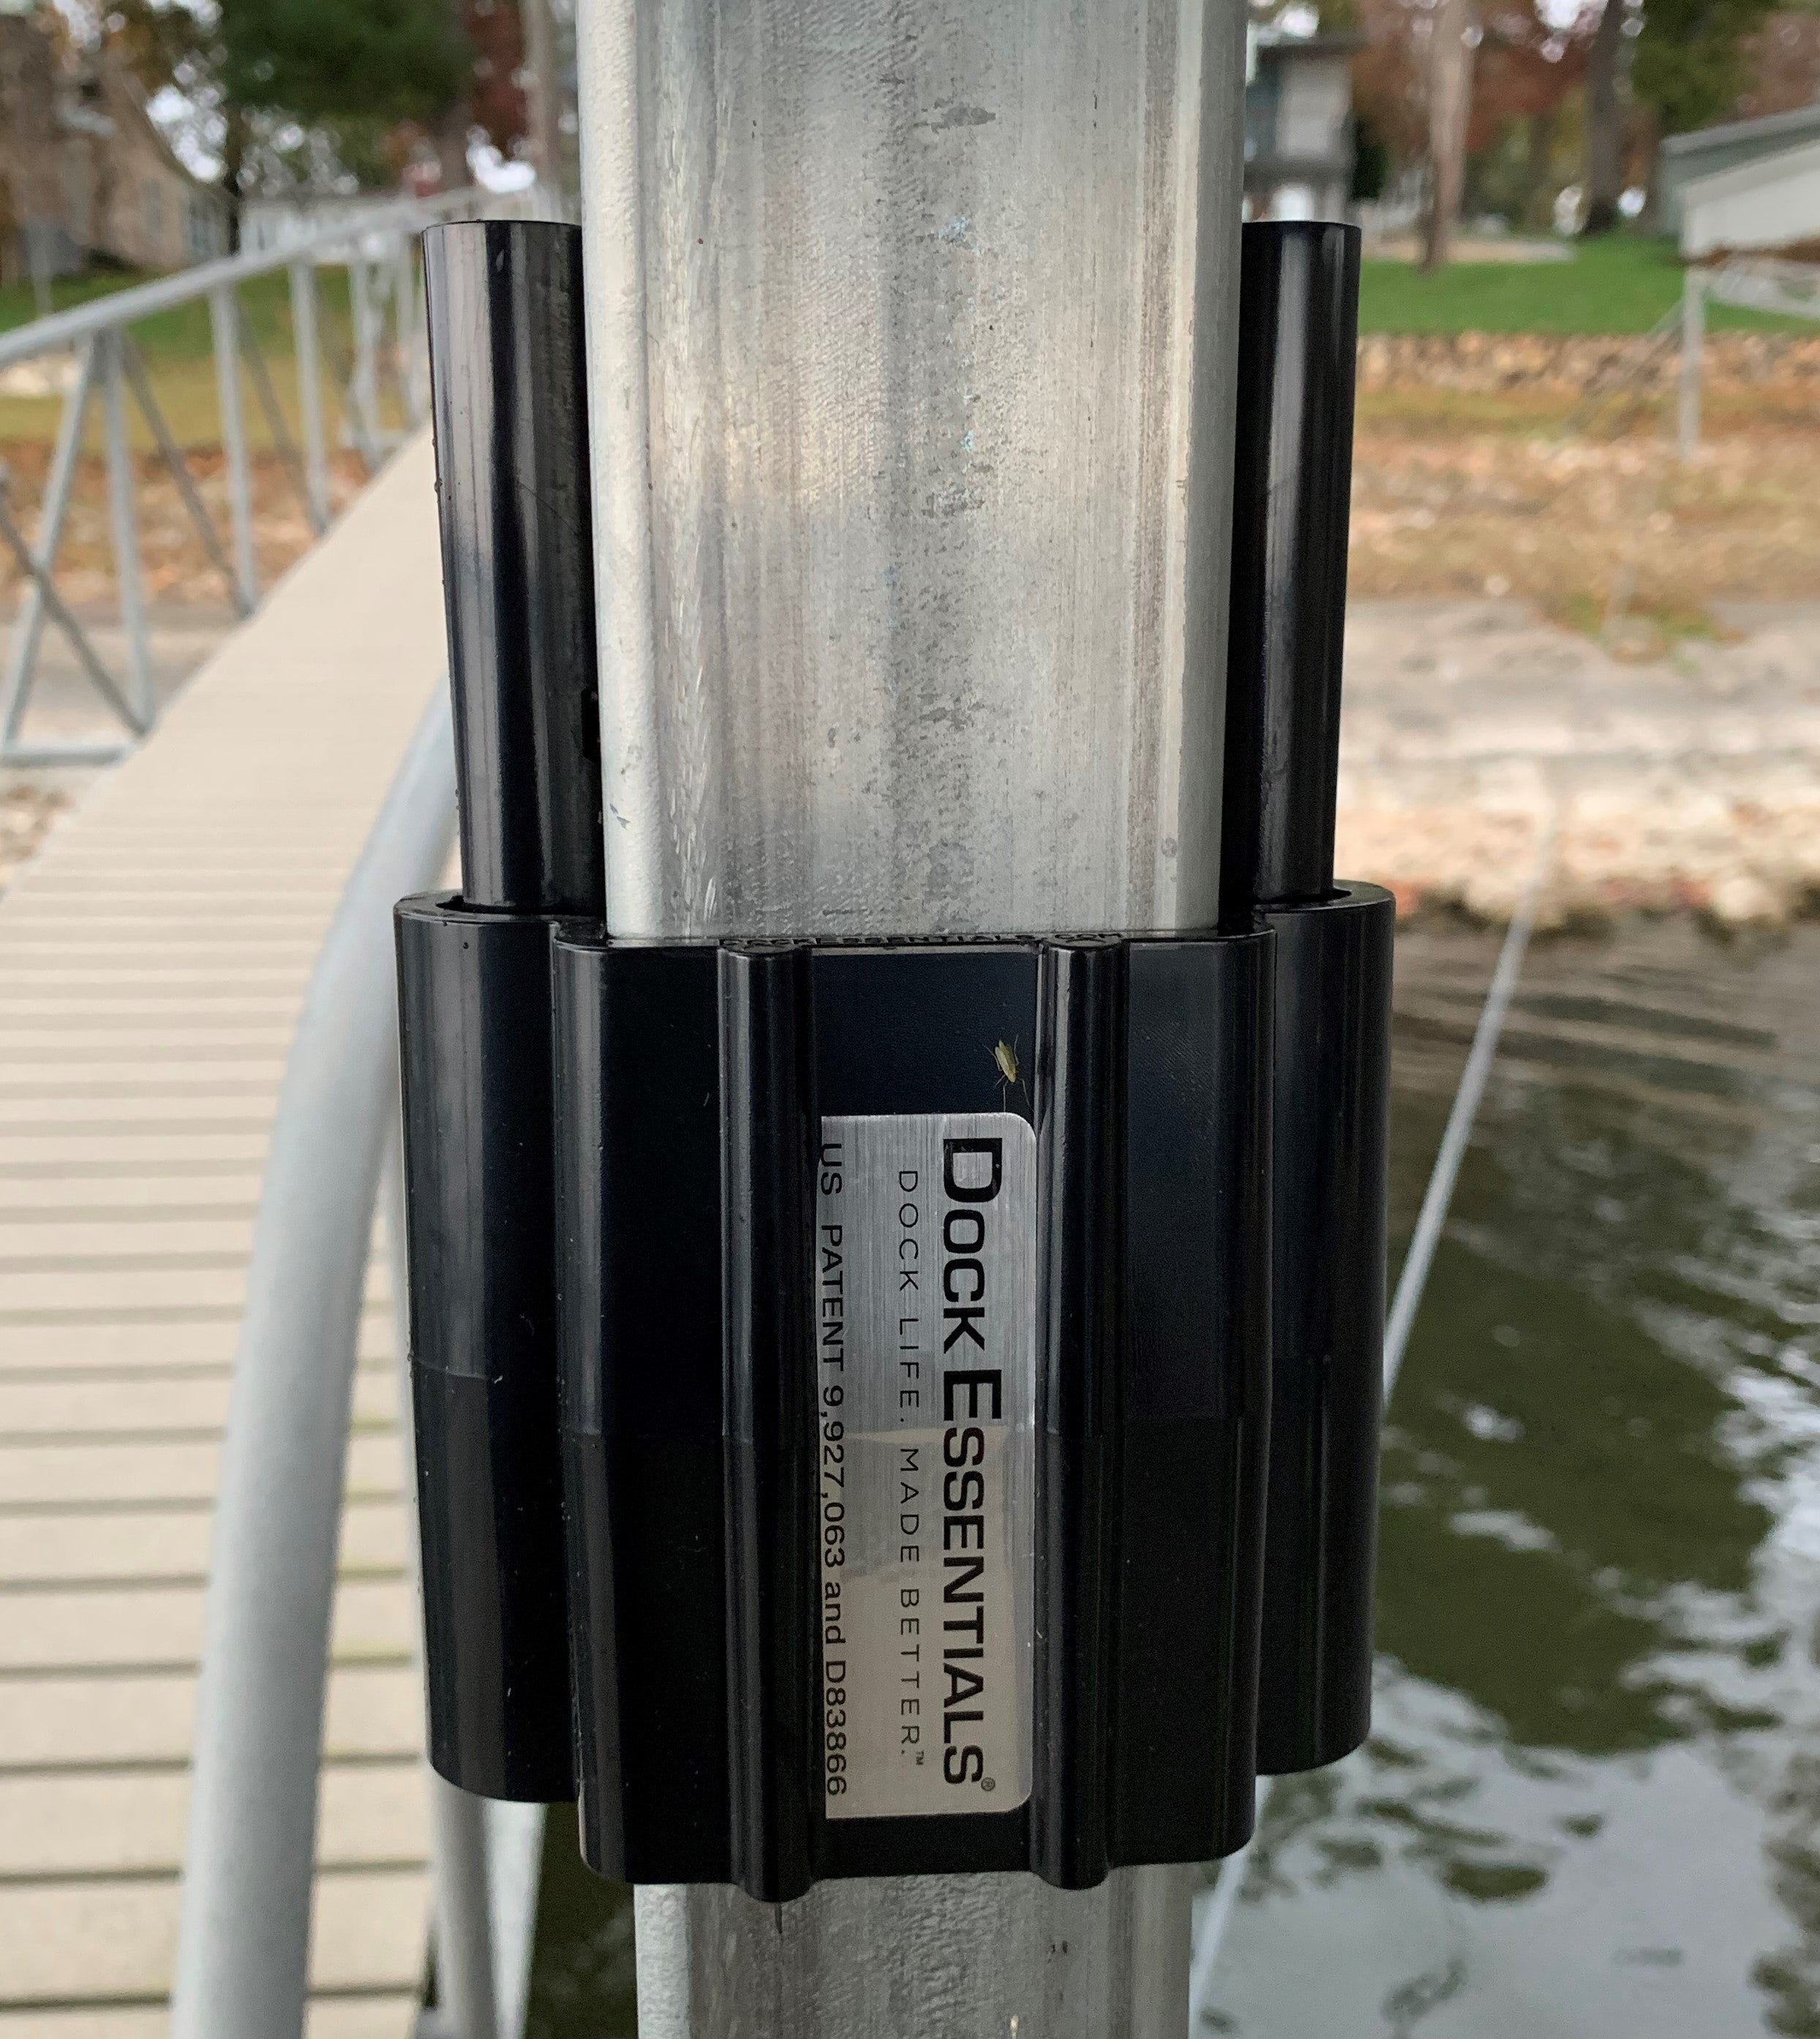 Slipgrip Clasp - Universal boat dock mounting system